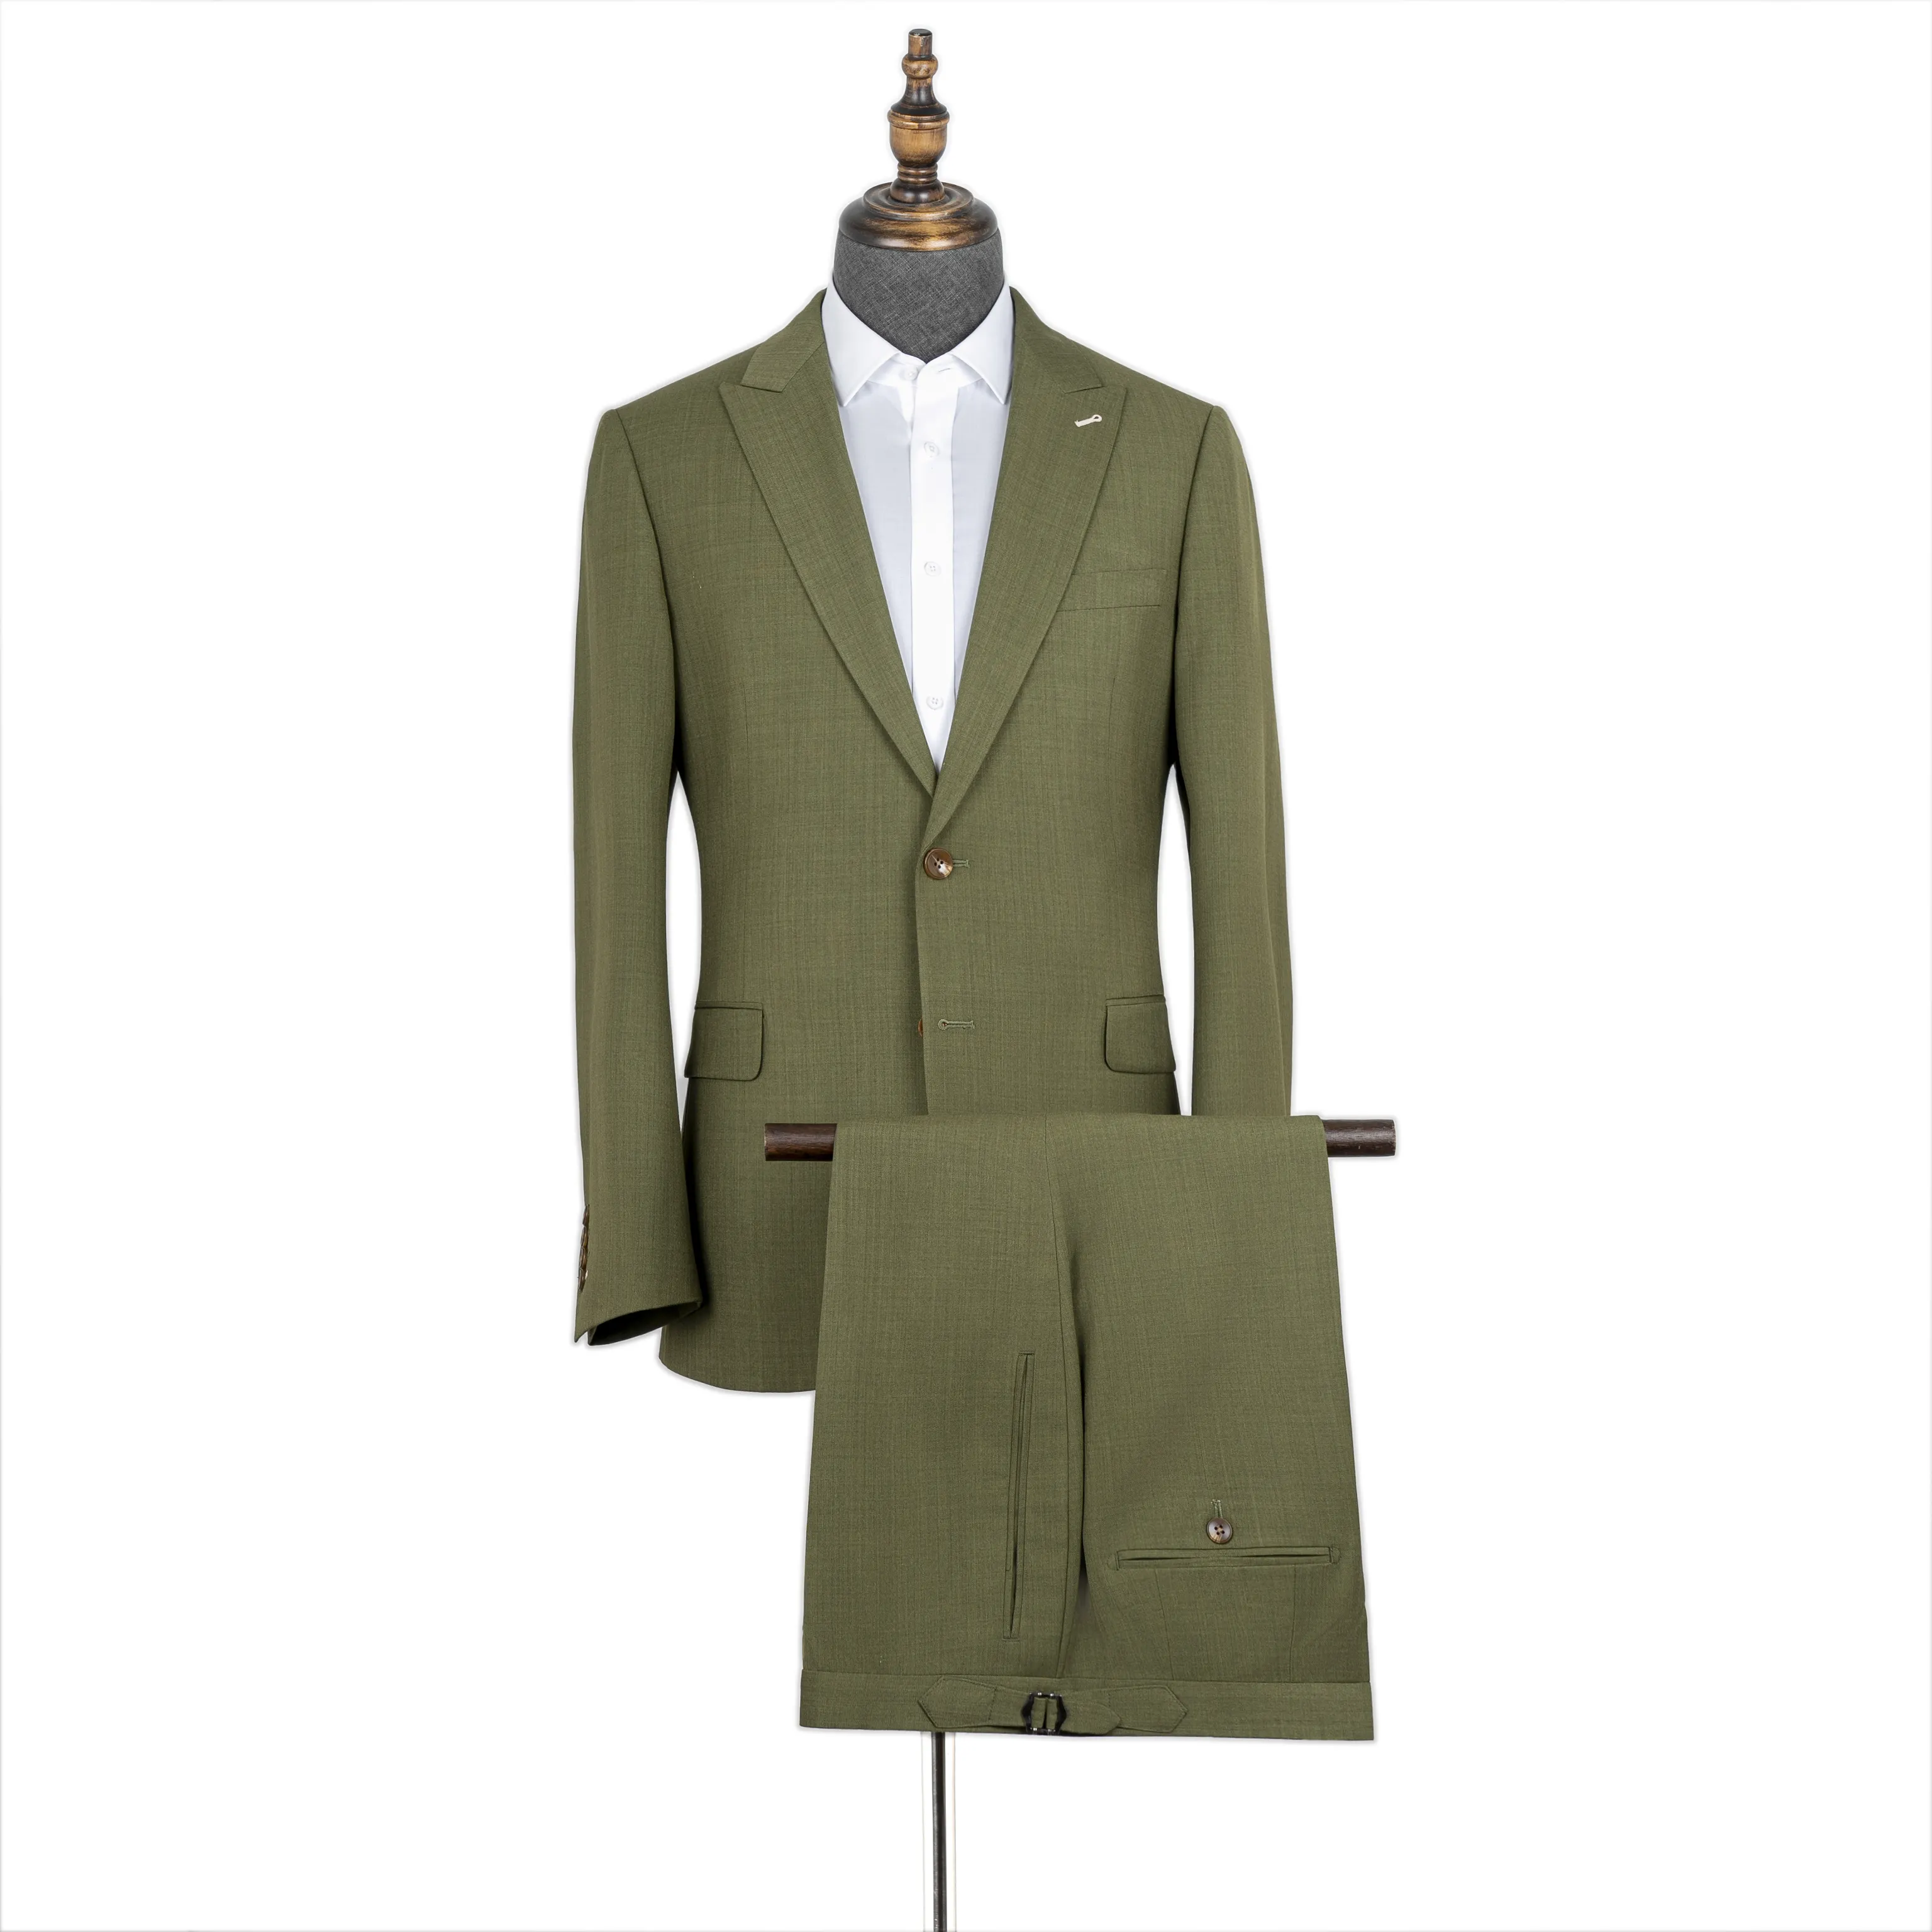 2023 Hot Sale New Classic Casual Fashion Coat Dark Green Business Suit Blazer Jacket Suits For Men